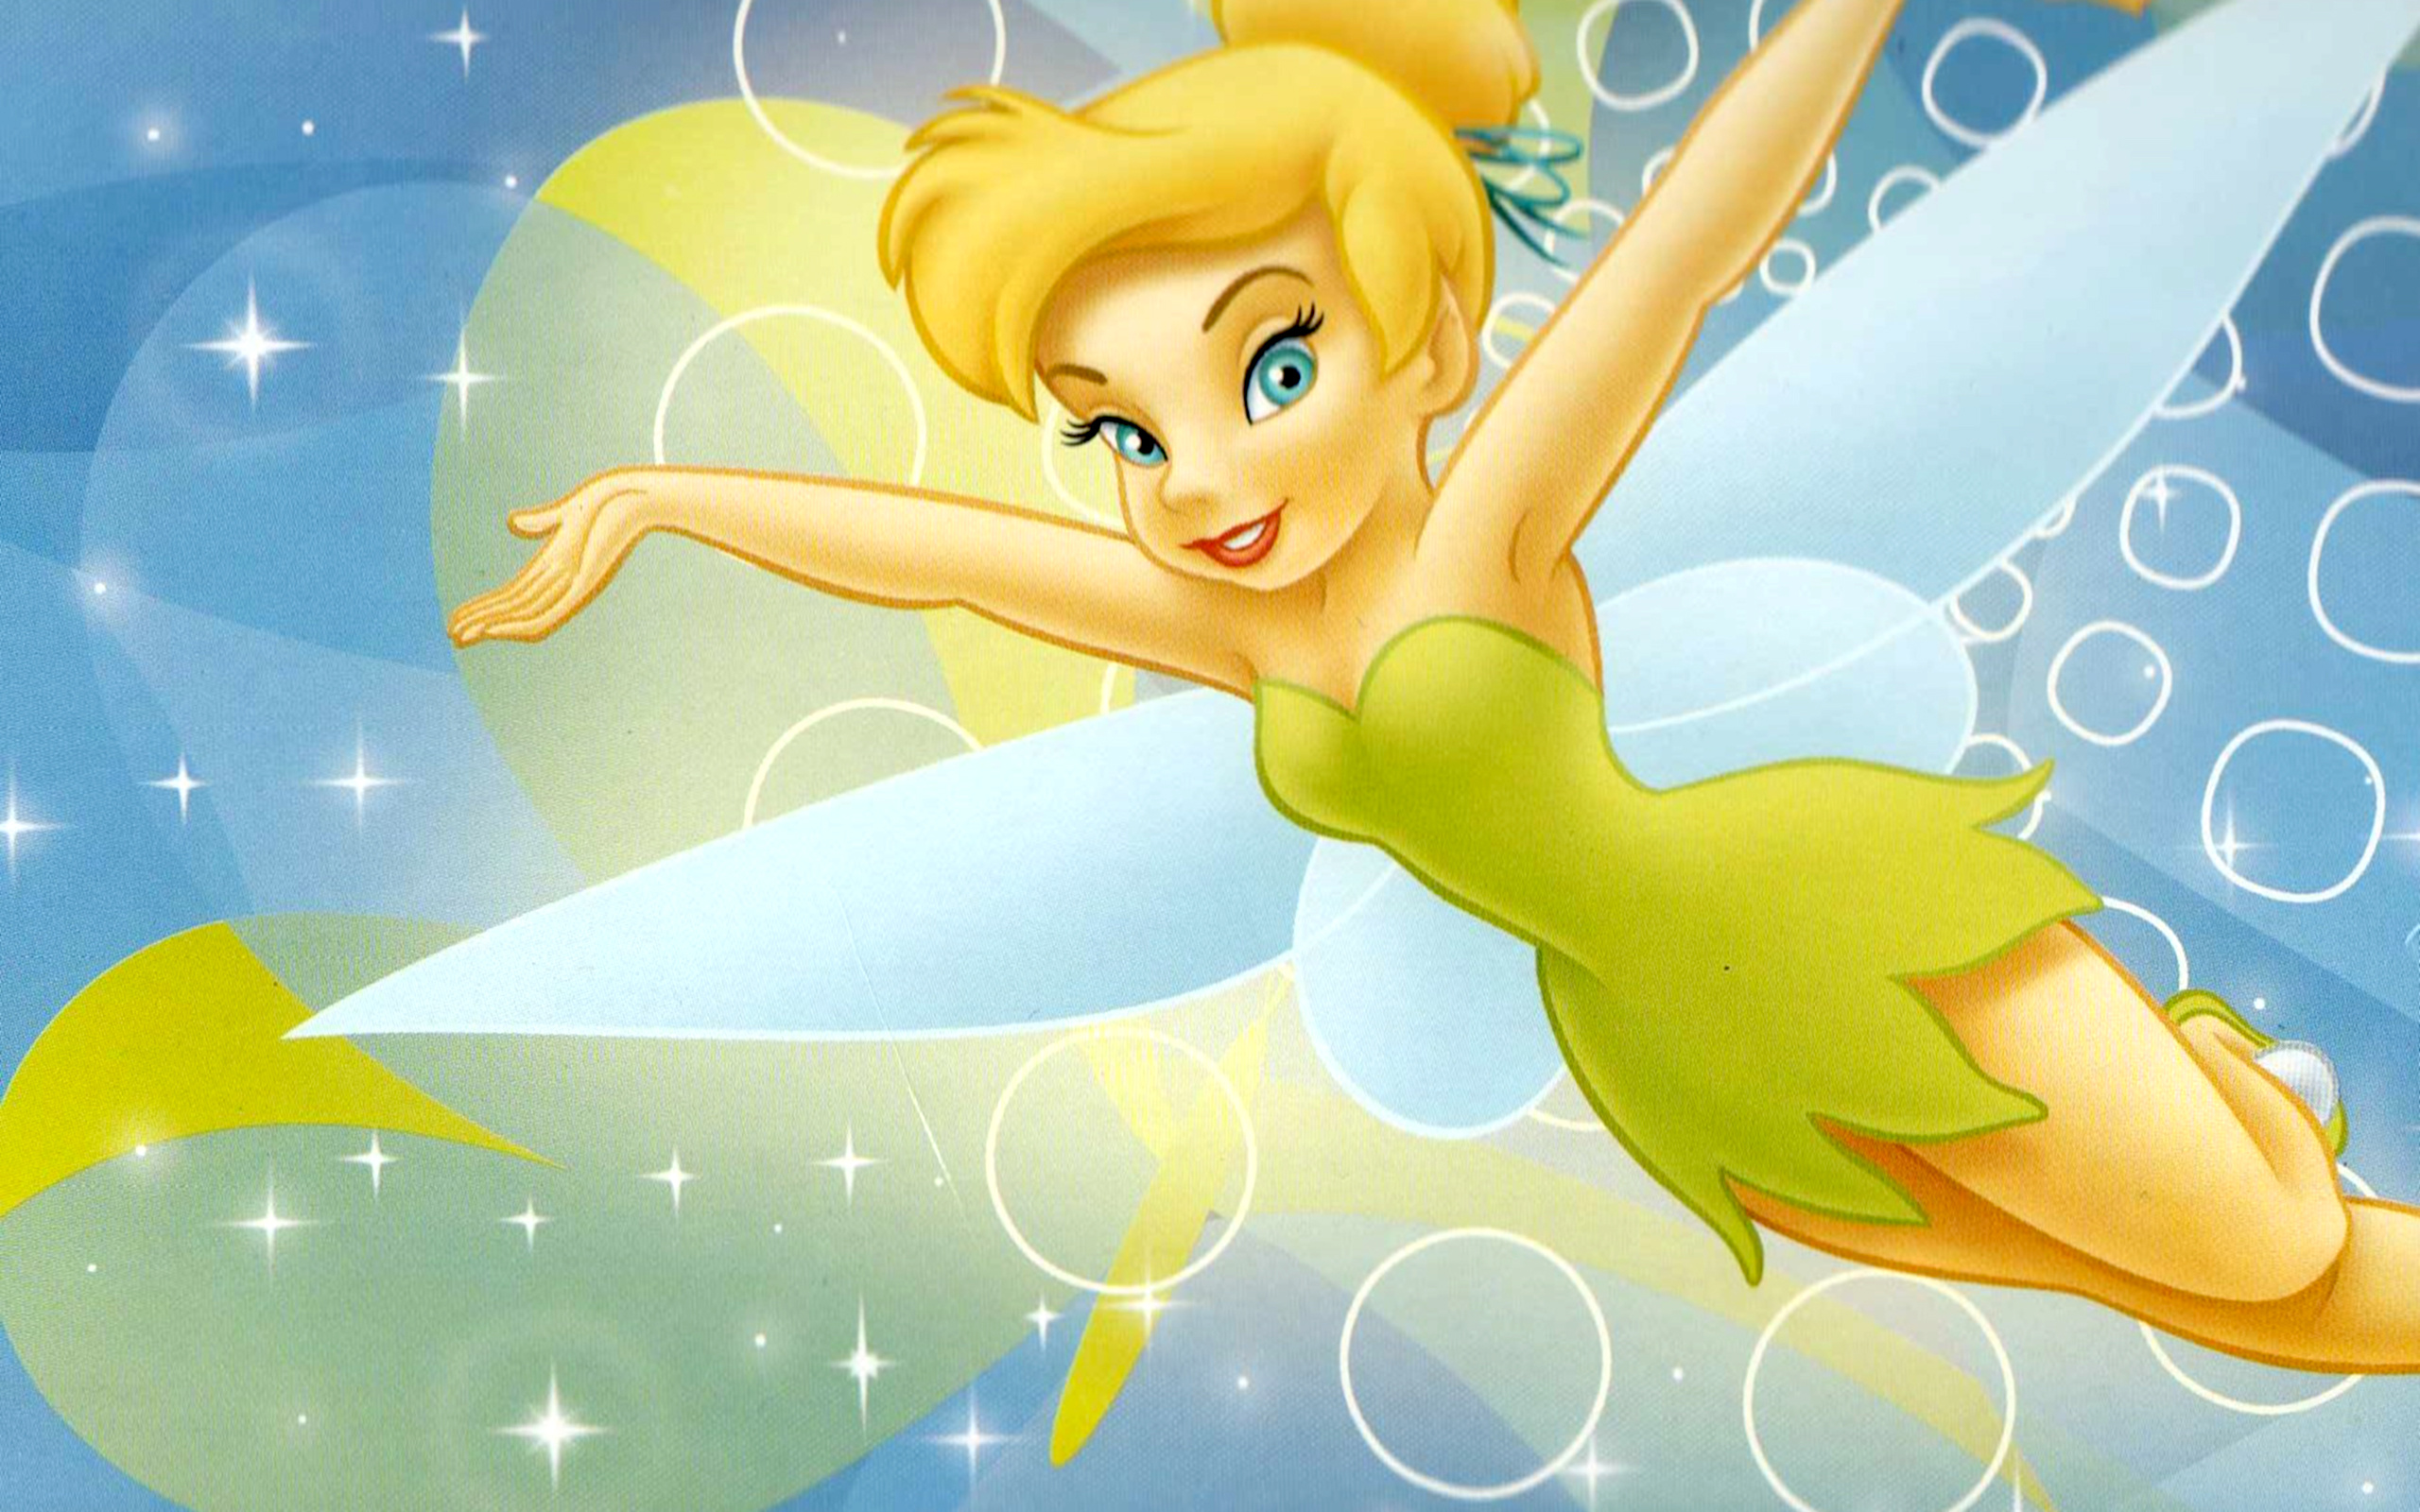 Tinker Bell wallpapers, Cartoon characters, High-quality images, Magical fantasy, 2560x1600 HD Desktop